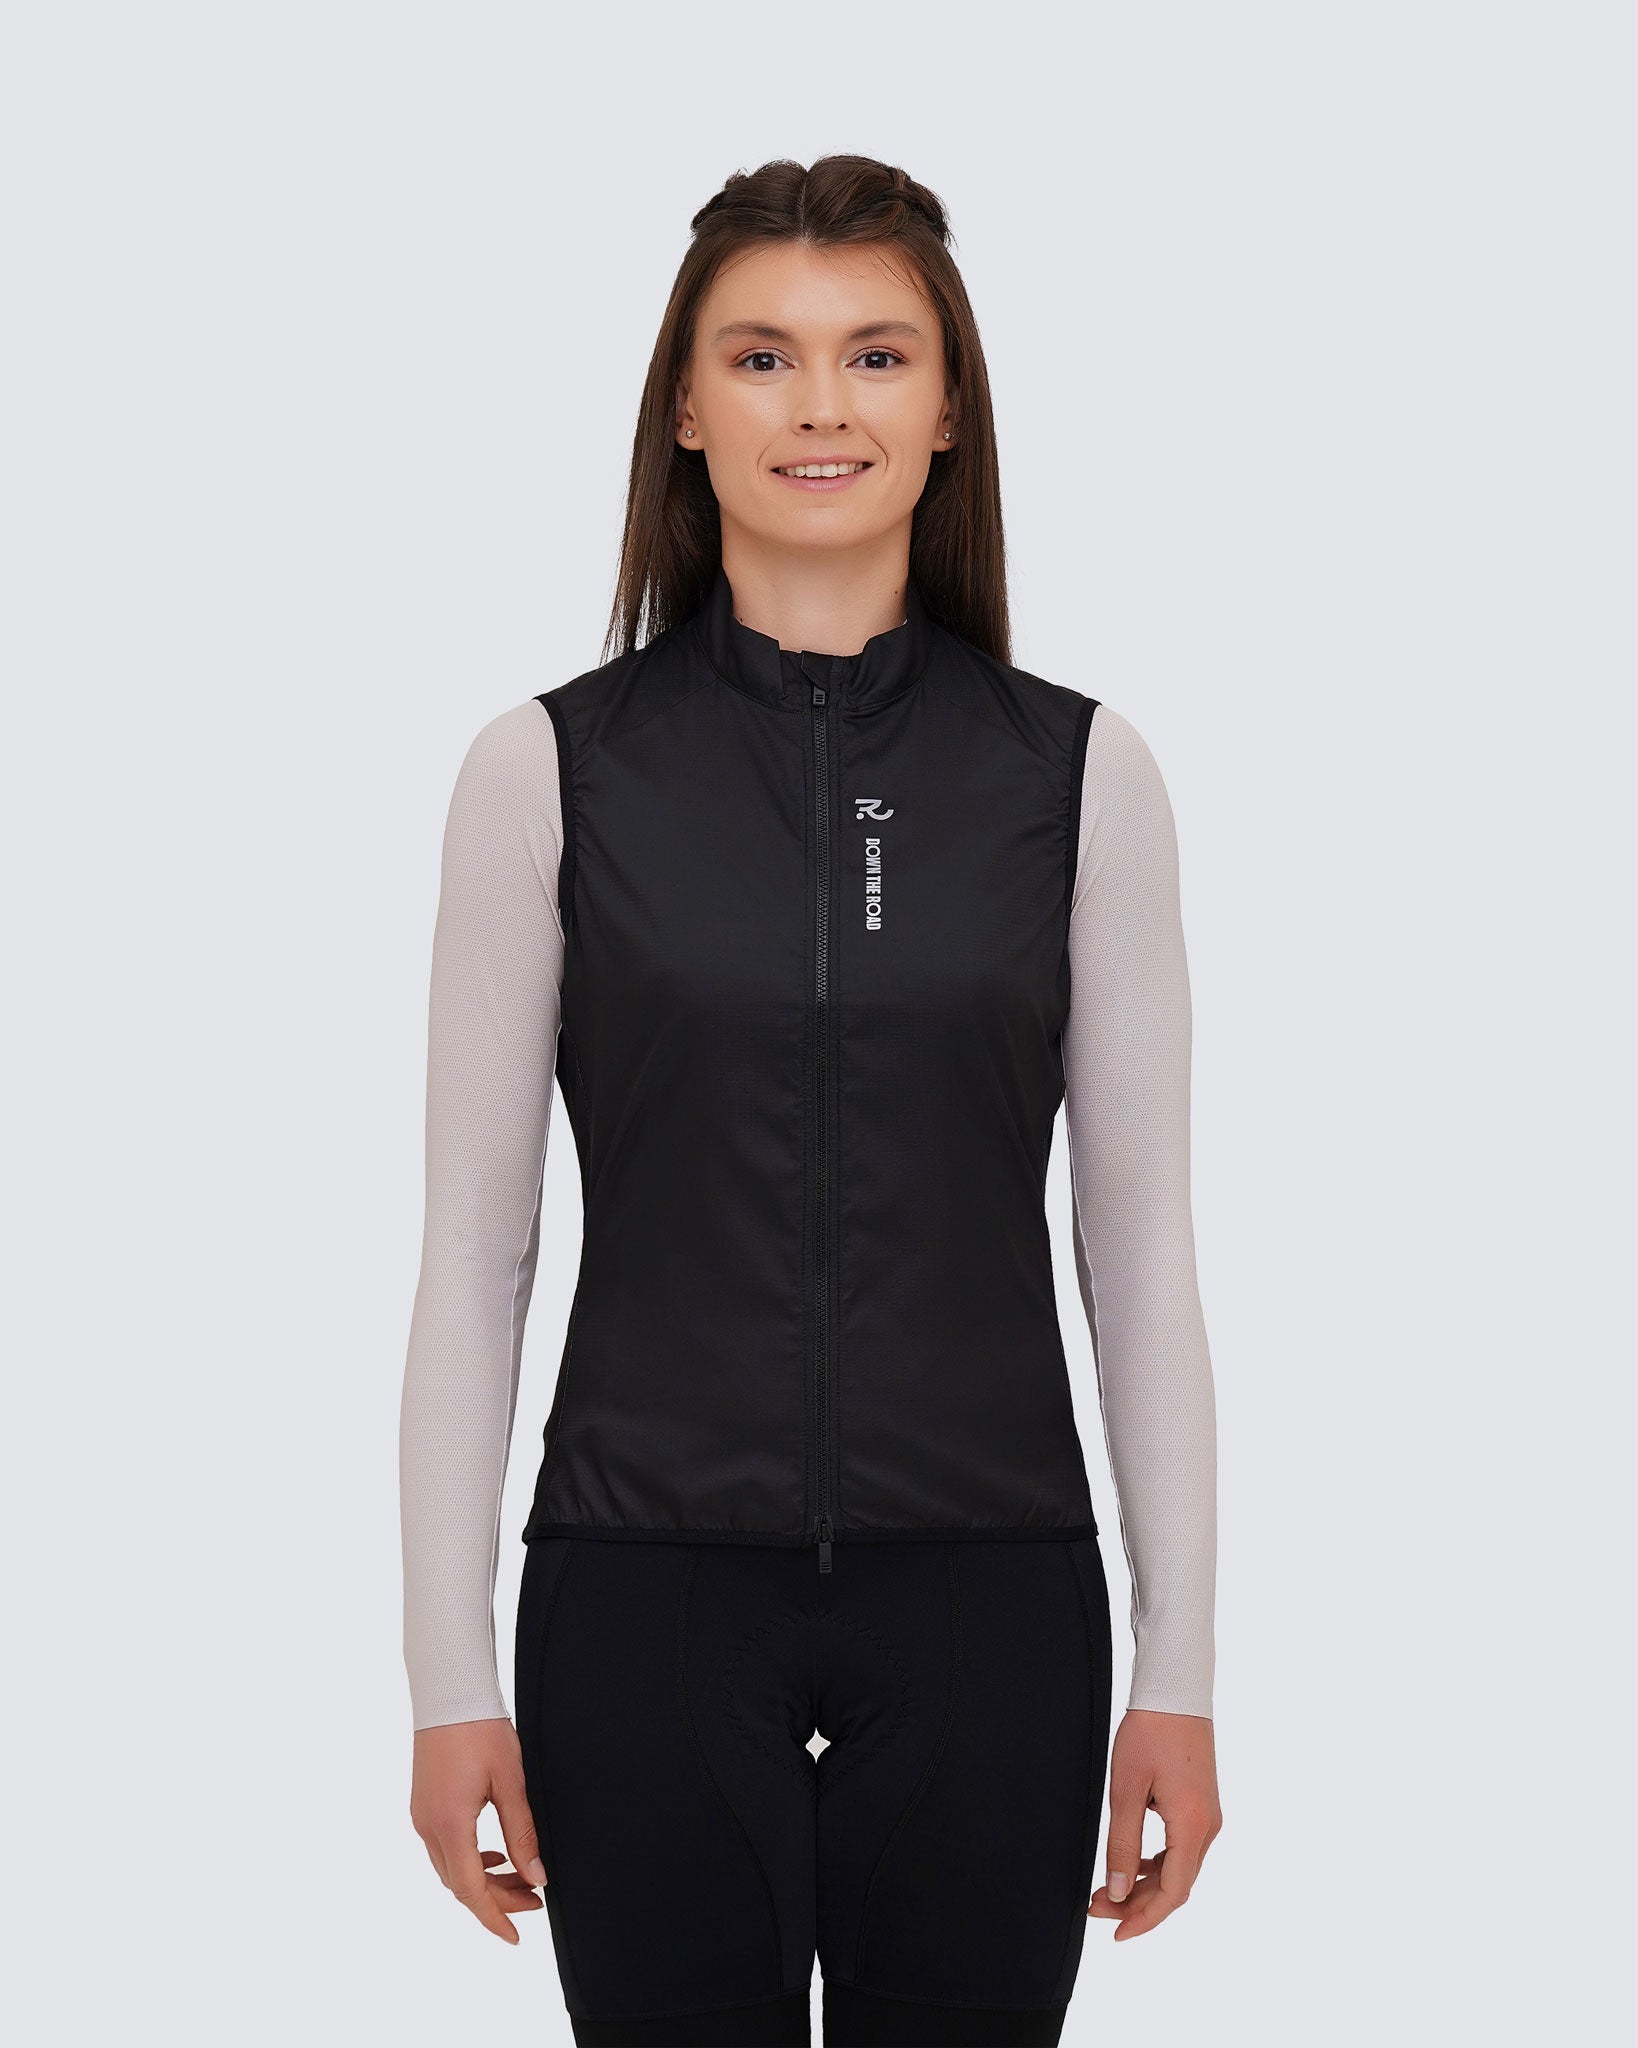 front view of black vest for women